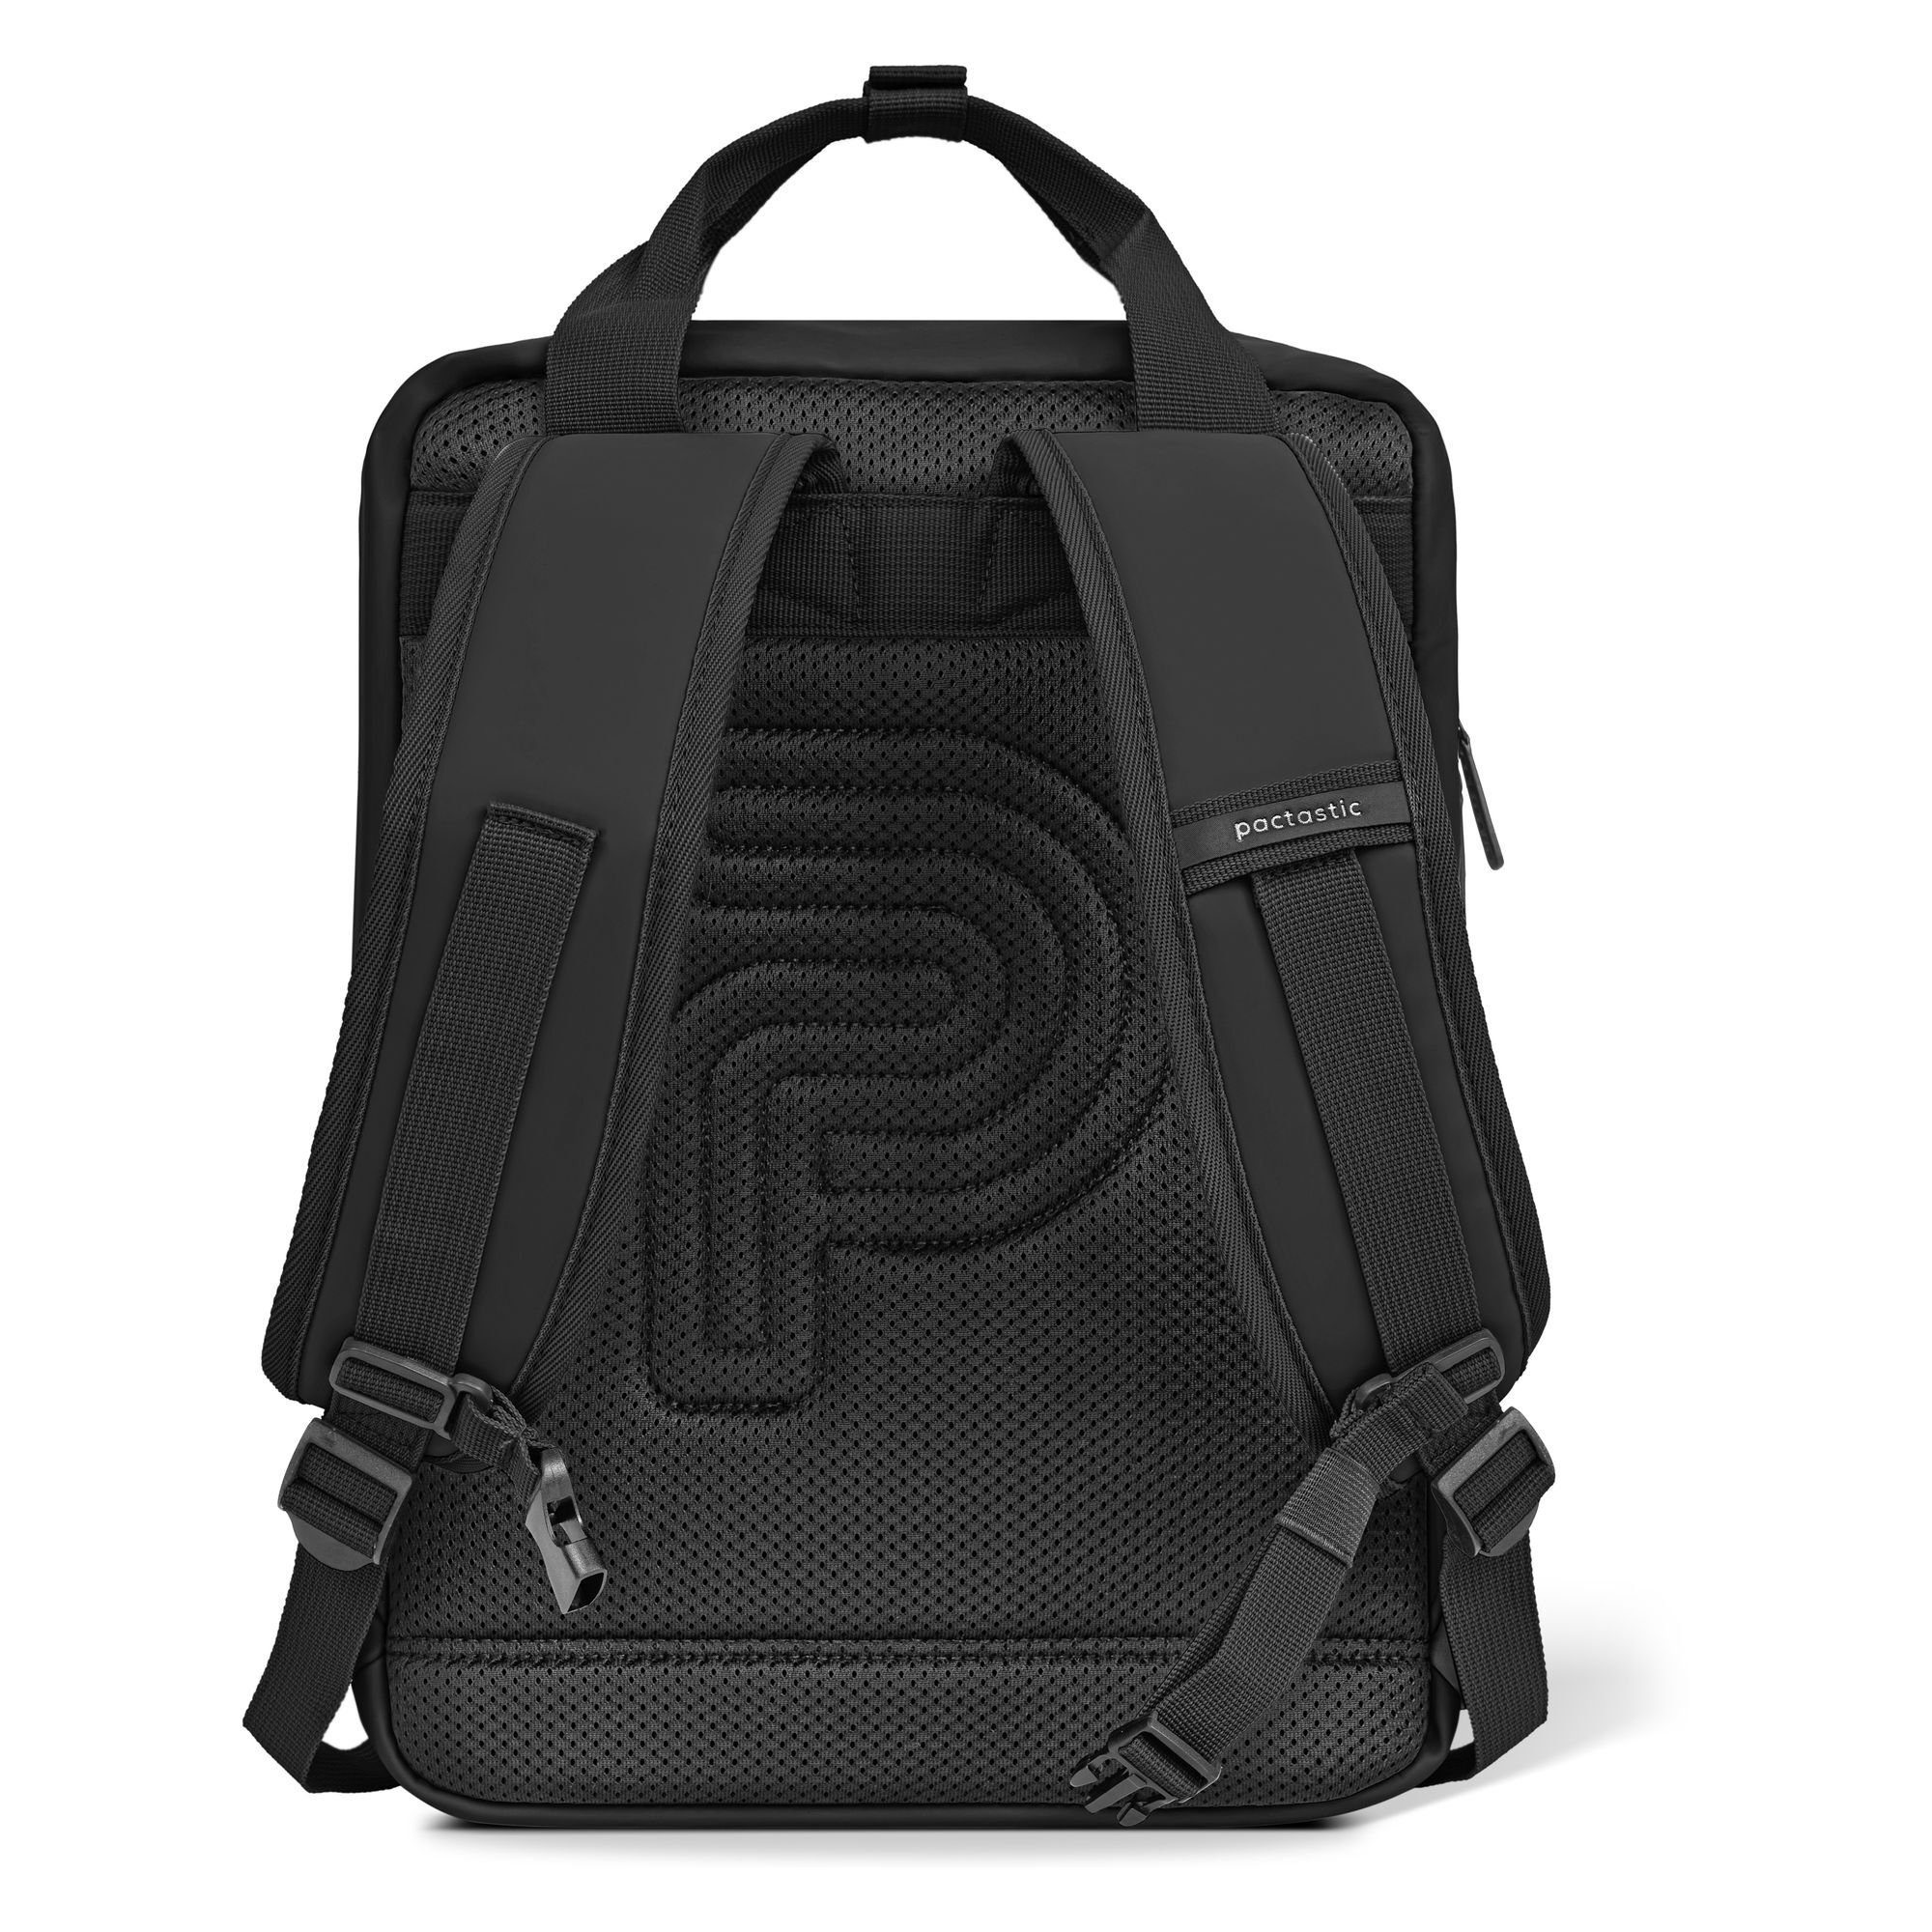 Urban Tech-Material black Collection, Veganes Pactastic Daypack